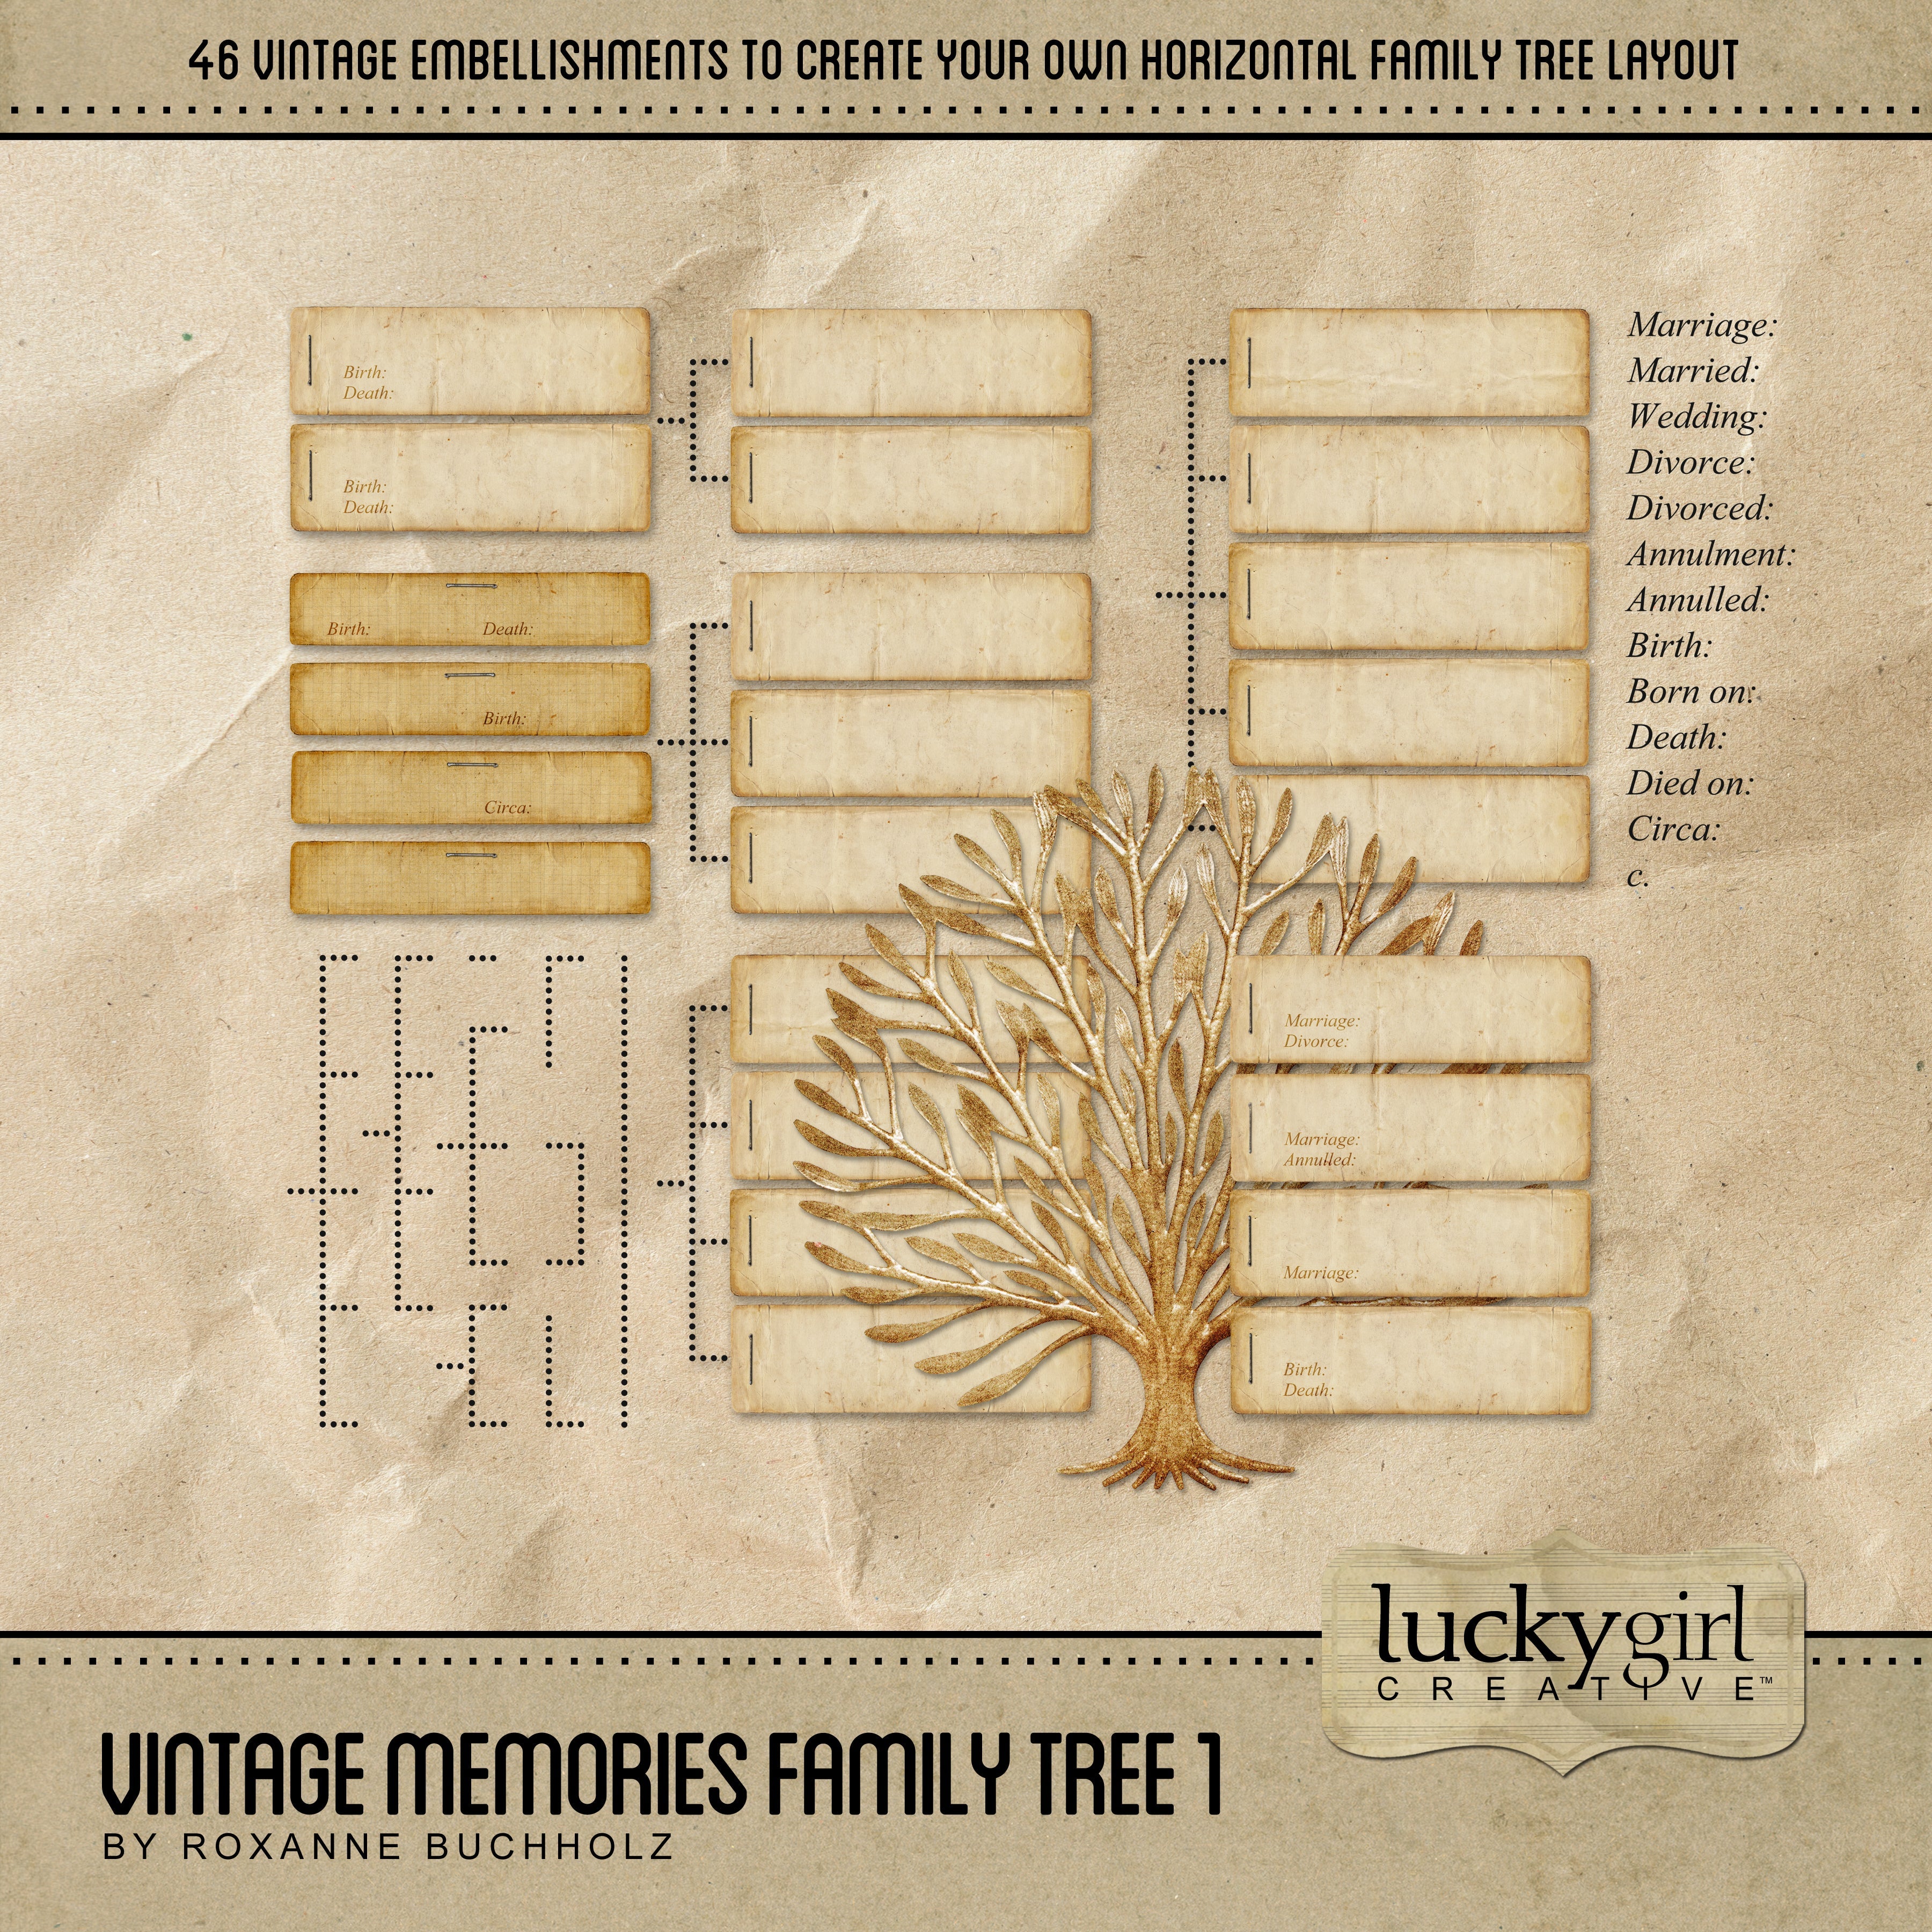 Heritage and Genealogy digital scrapbook kits by Lucky Girl Creative are inspired by family history and genealogy research. These antique collections feature realistic scrapbook embellishments and digital papers to help you tell your story.